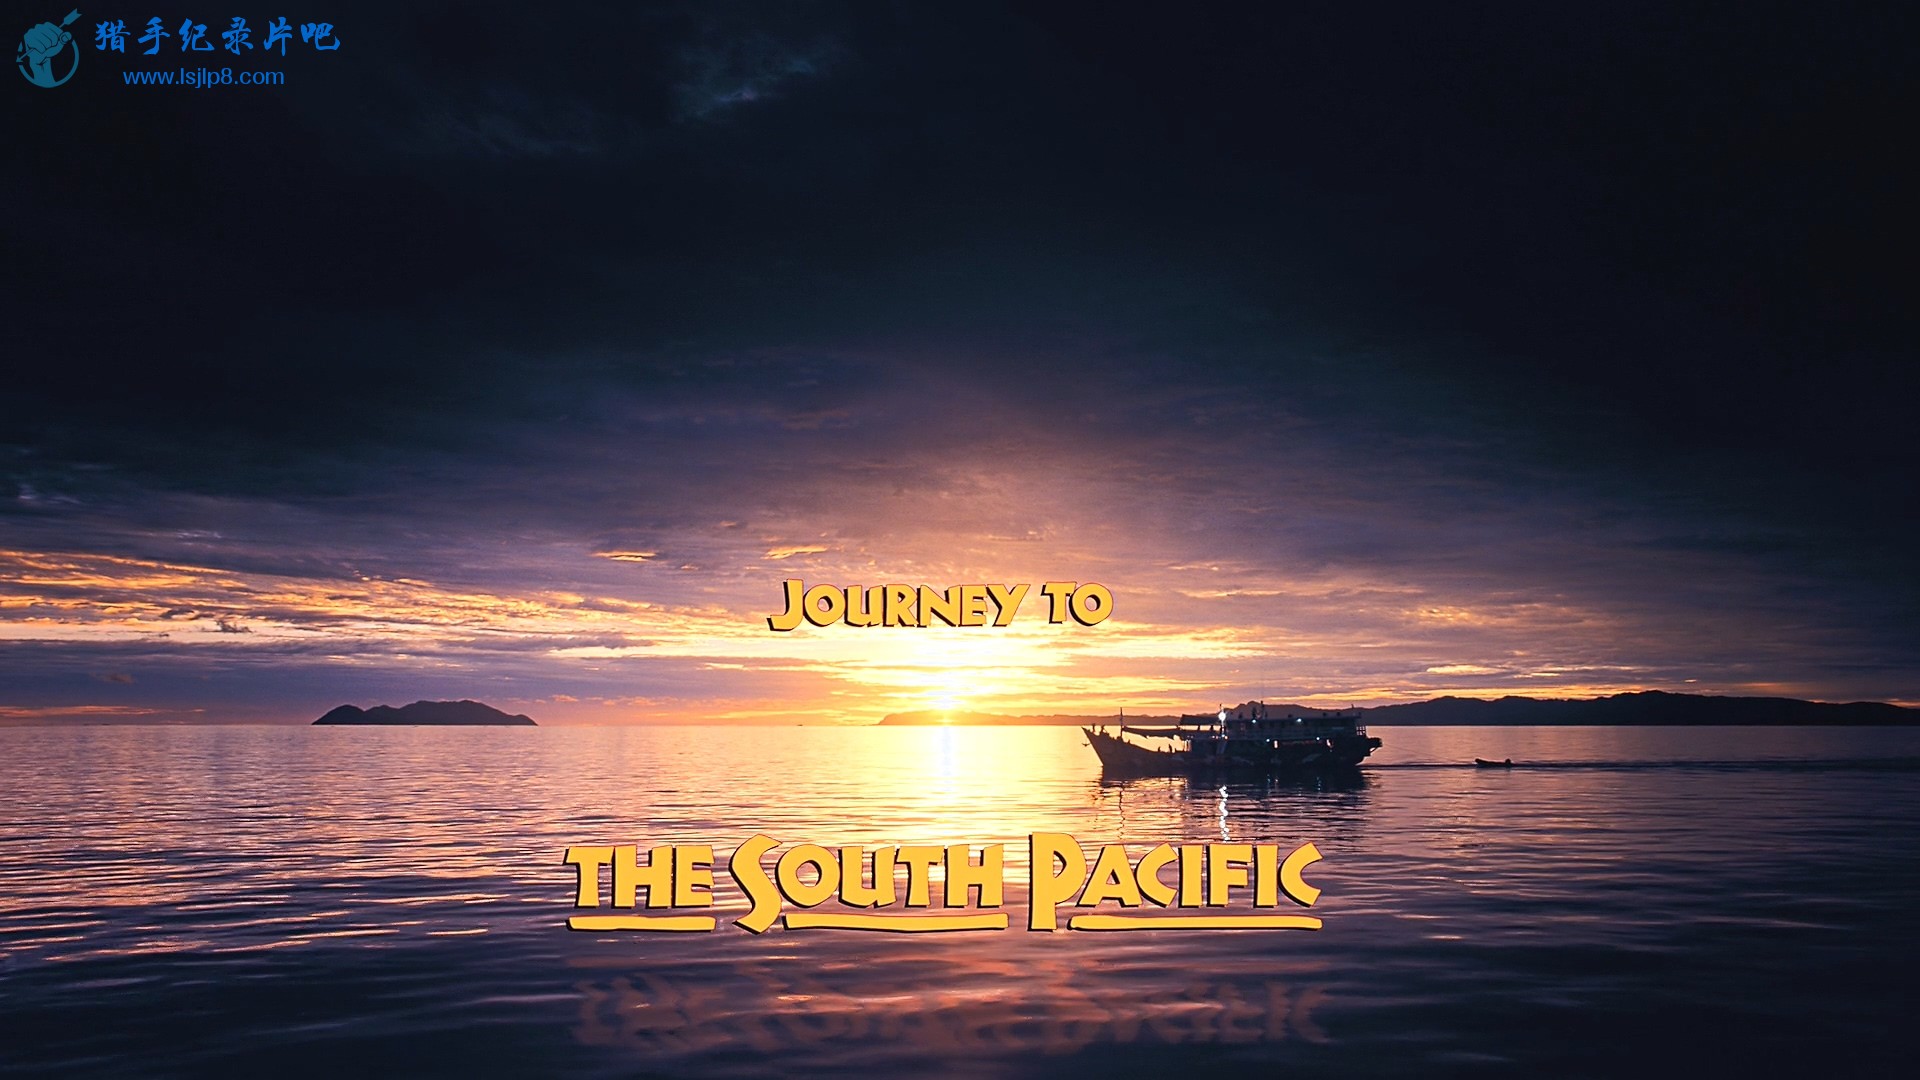 Journey.to.the.South.Pacific.2013.DOCU.1080p.BluRay.x264.DTS-SWTYBLZ.mkv_2019092.jpg